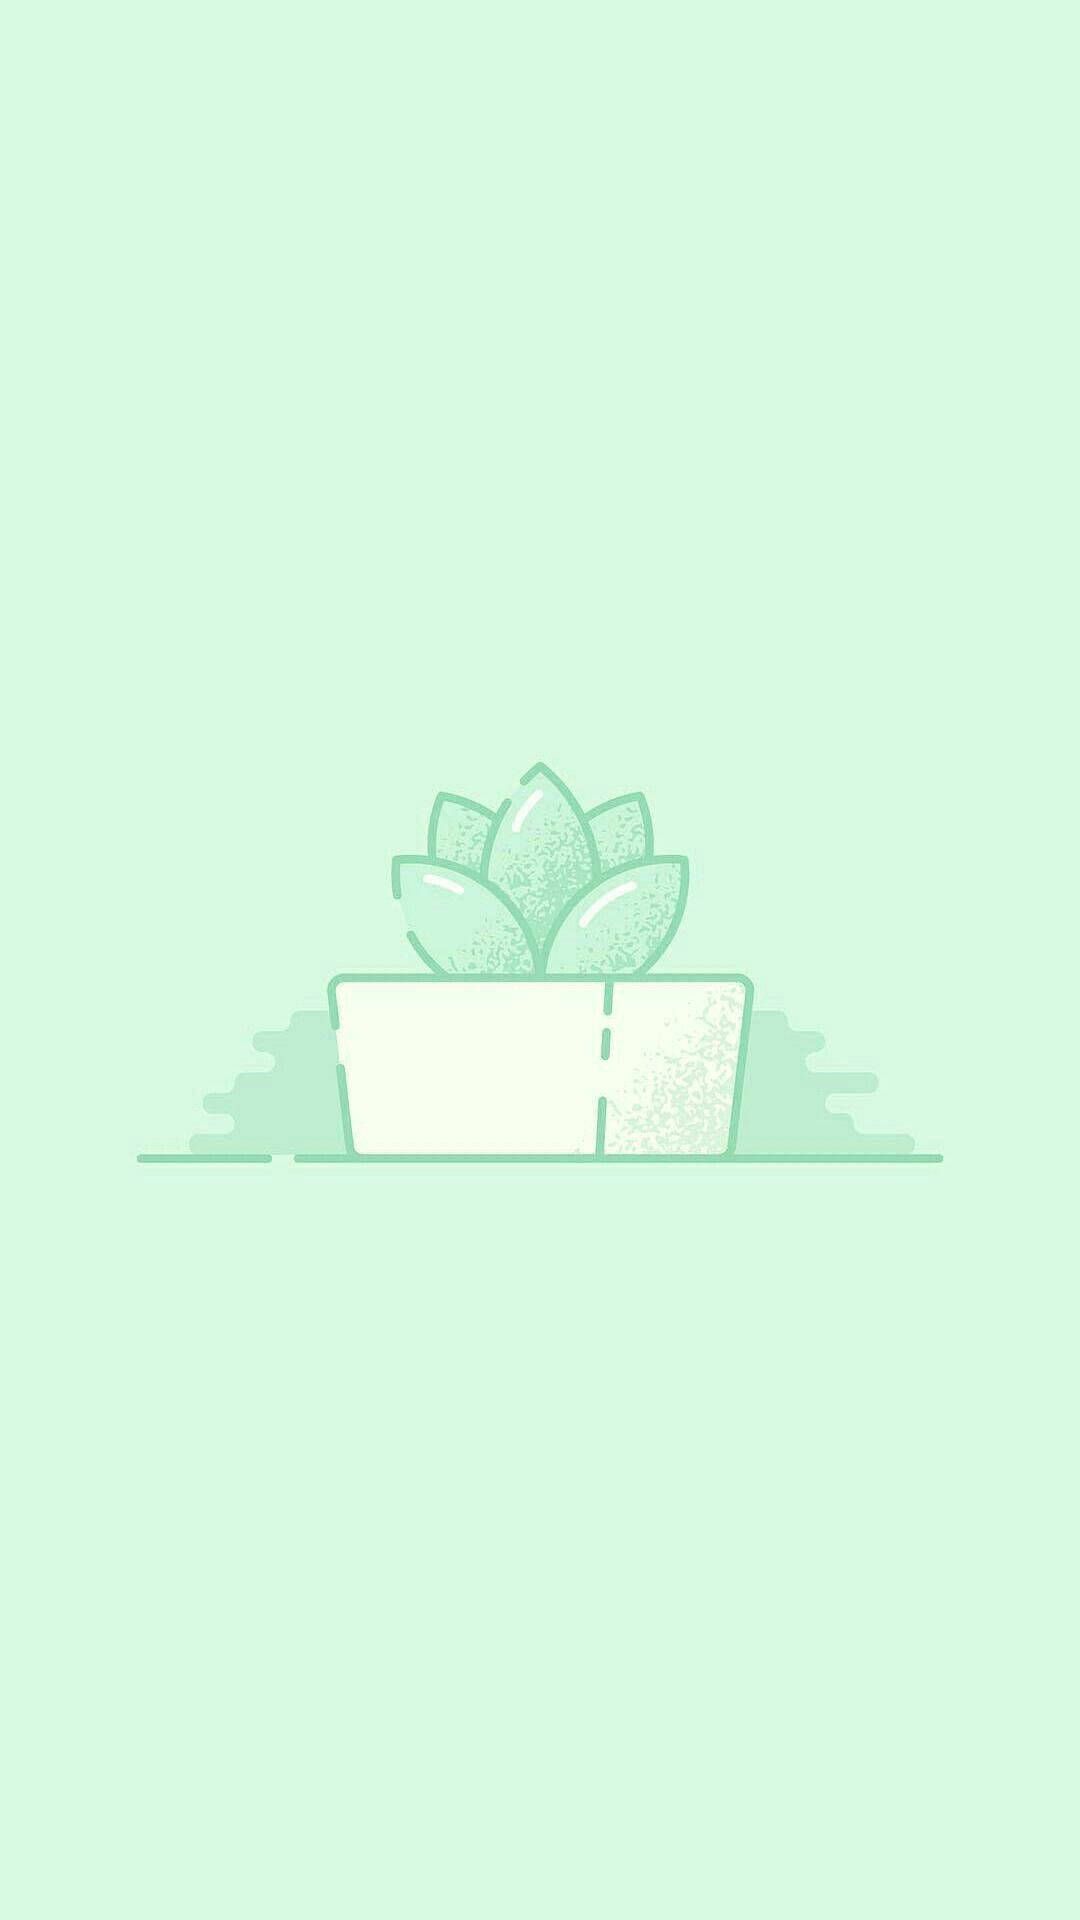 A cute illustration of a succulent plant in a pot - Green